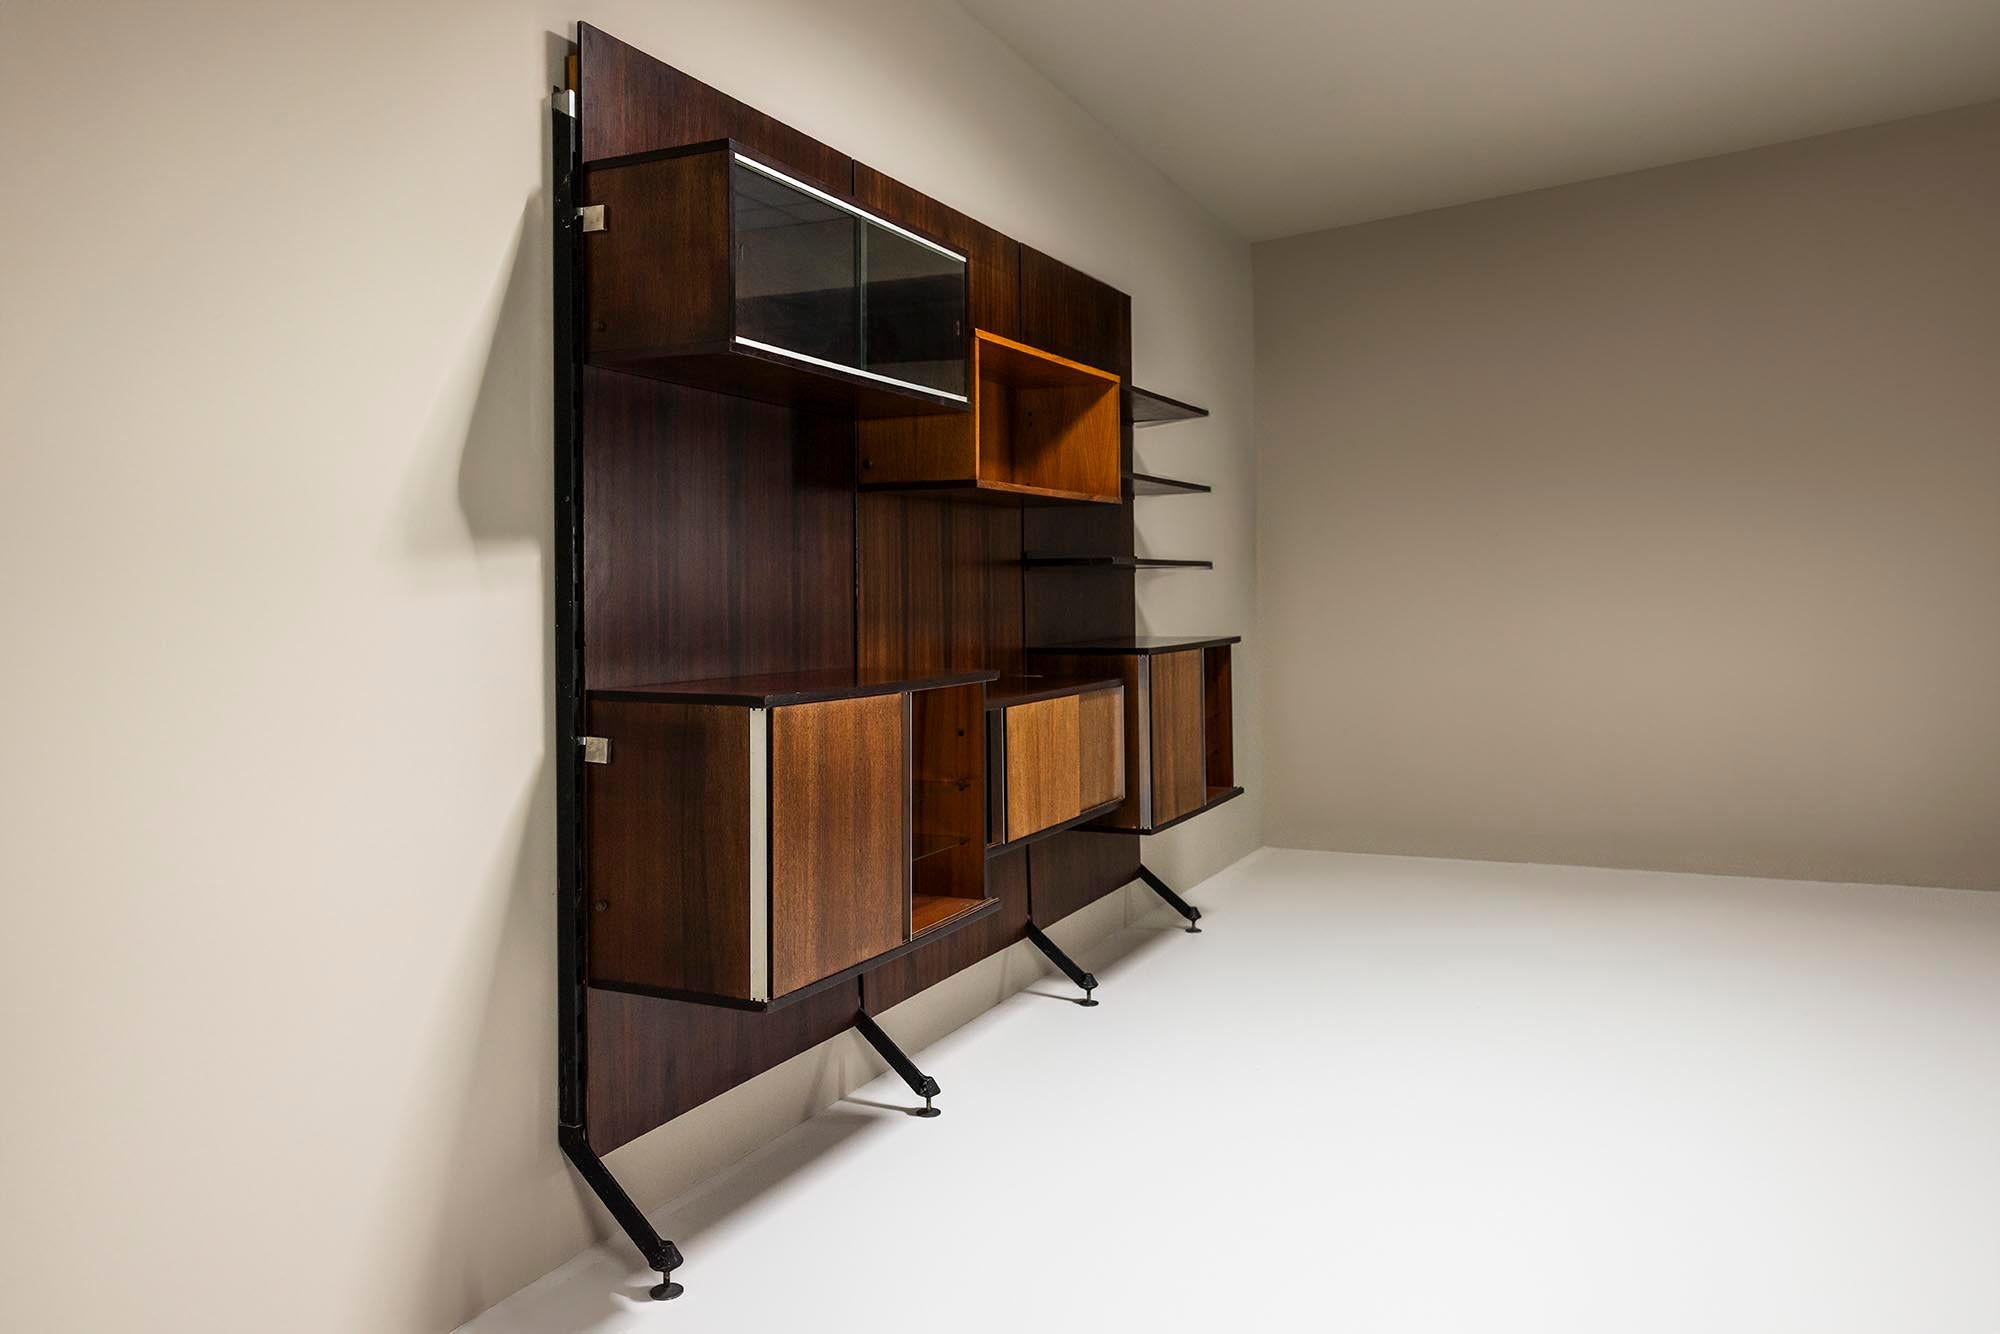 Mid-20th Century Urio Wall System in Rosewood by Ico and Luisa Parisi for MIM Roma, Italy 1957 For Sale